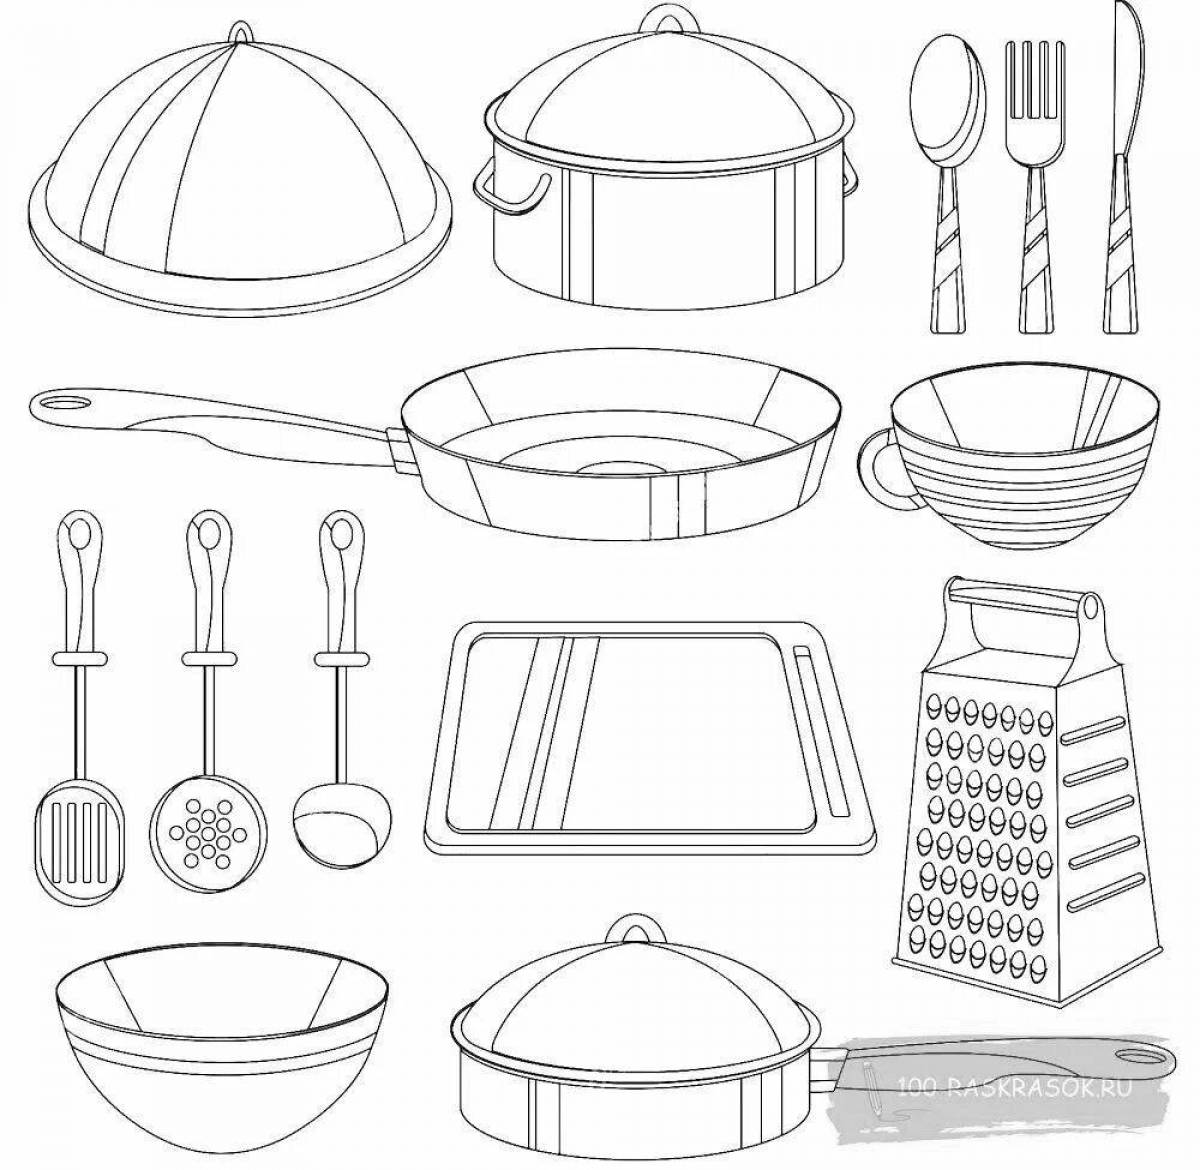 Fun coloring of dishes